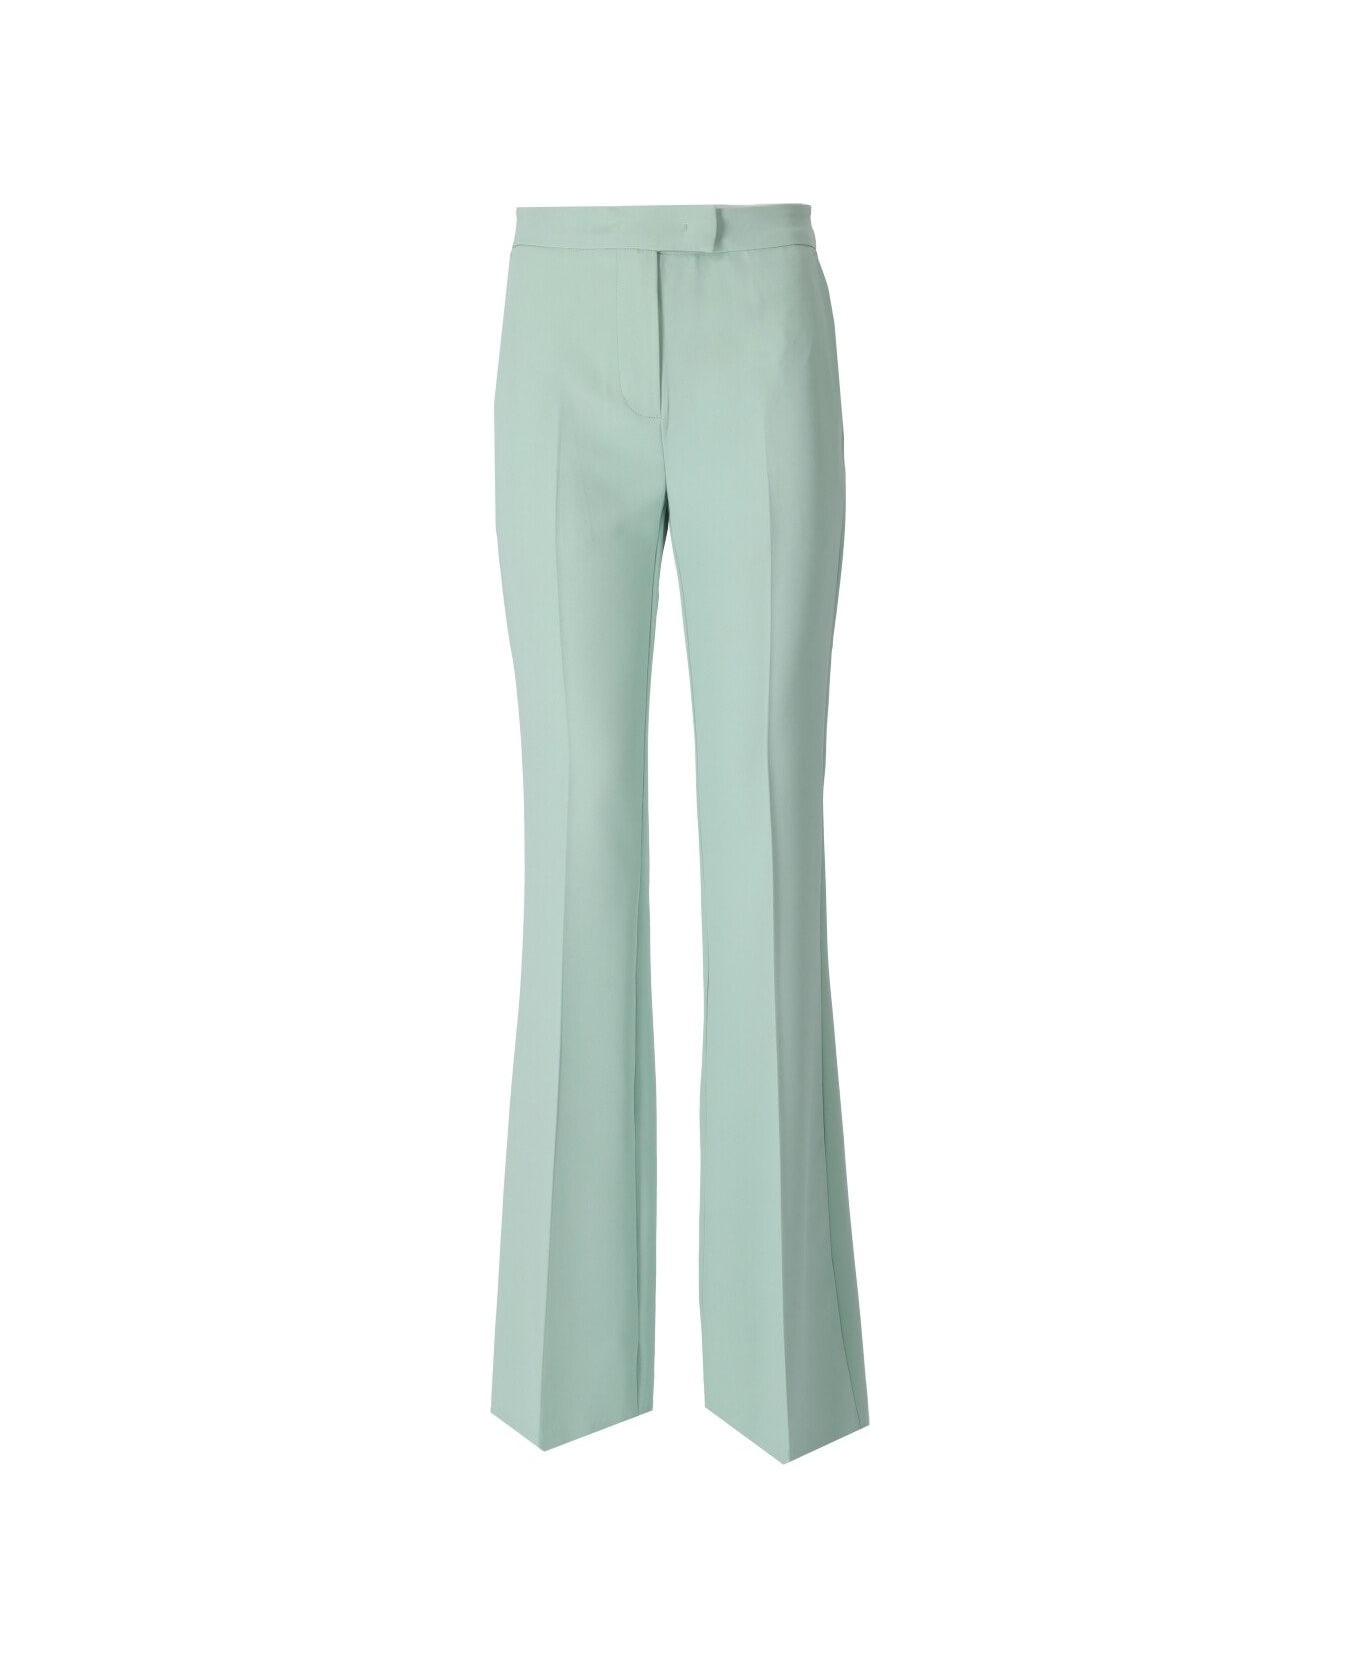 TwinSet Green Flare Trousers - Mint ボトムス